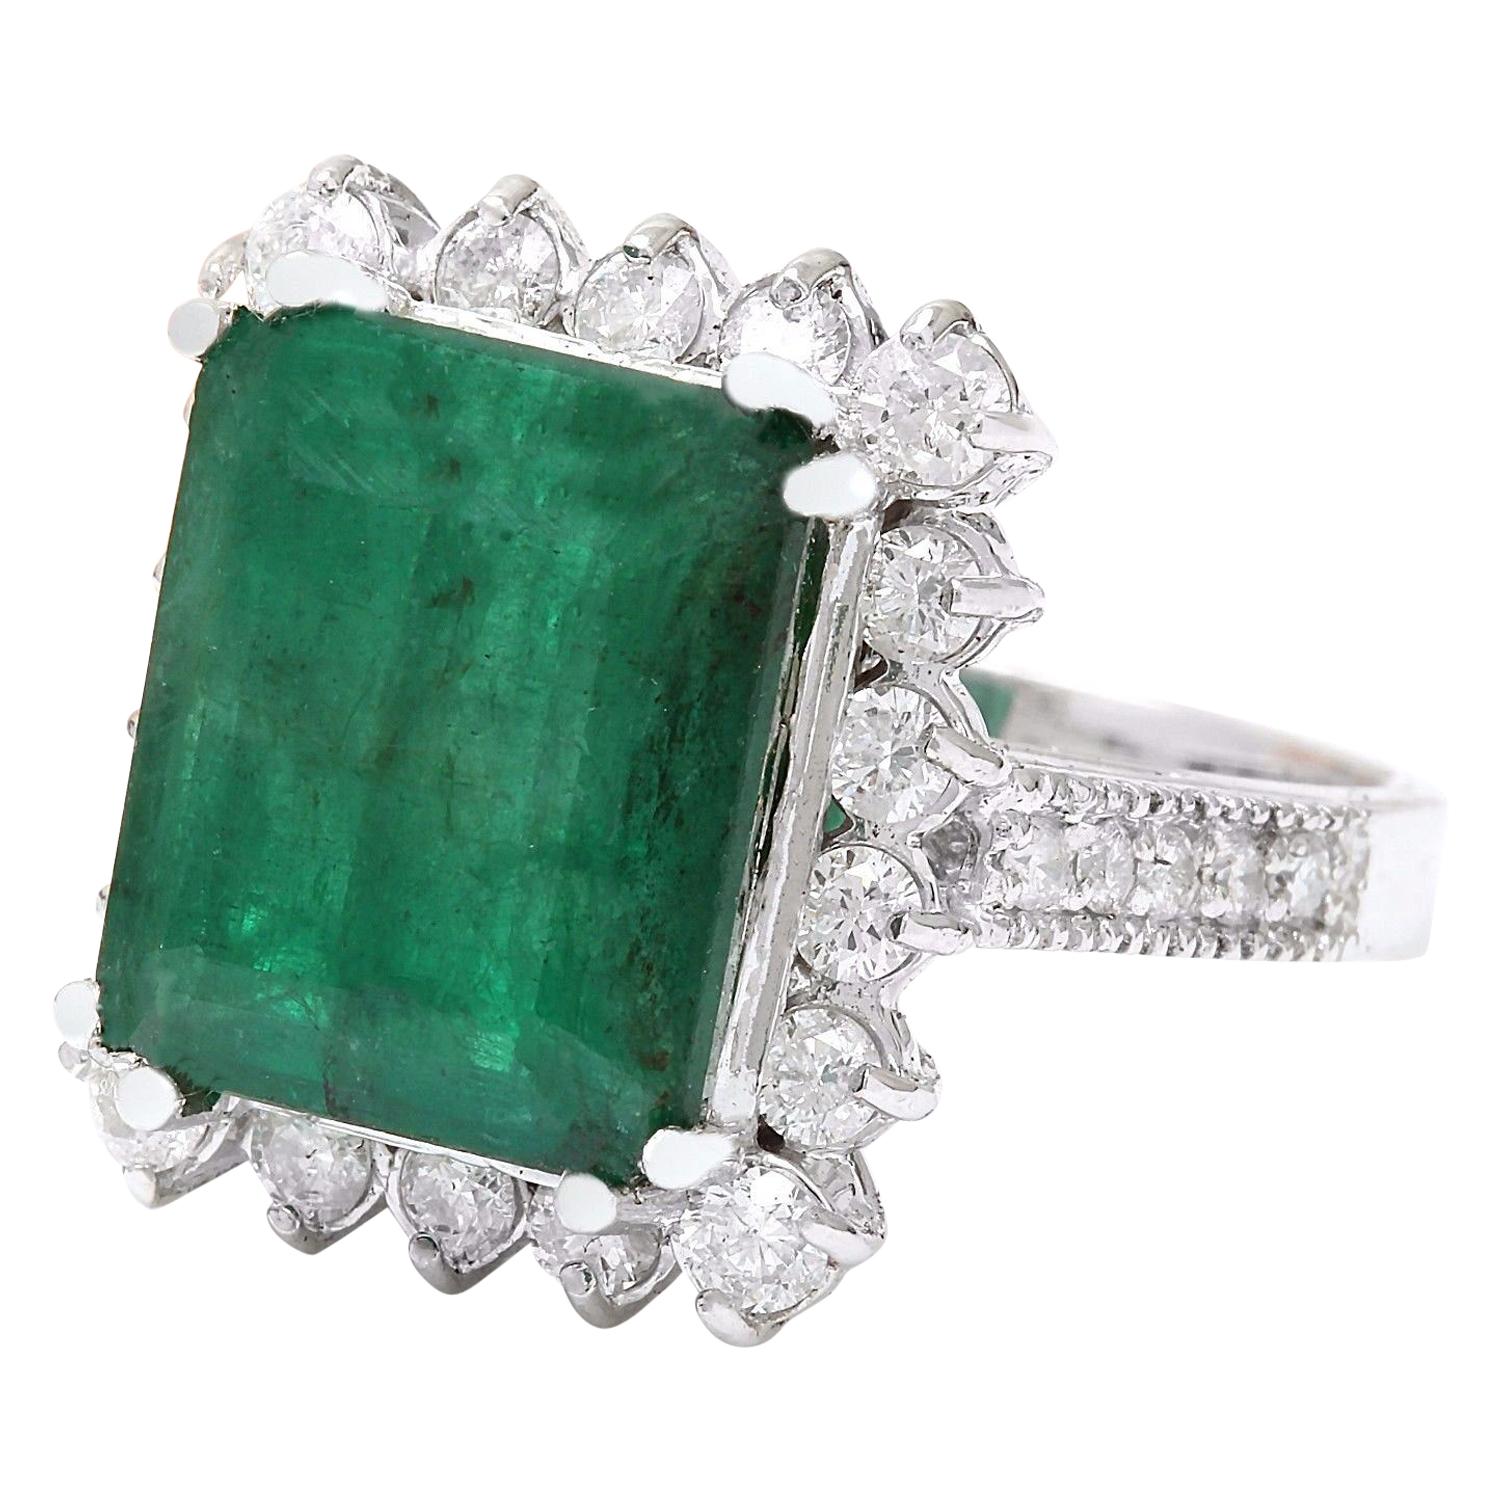 Presenting our opulent 14K Solid White Gold Diamond Ring featuring a magnificent 9.55 Carat Emerald as its centerpiece. Crafted with precision and elegance, this ring exudes sophistication and luxury. The dazzling Emerald, weighing 8.05 carats and